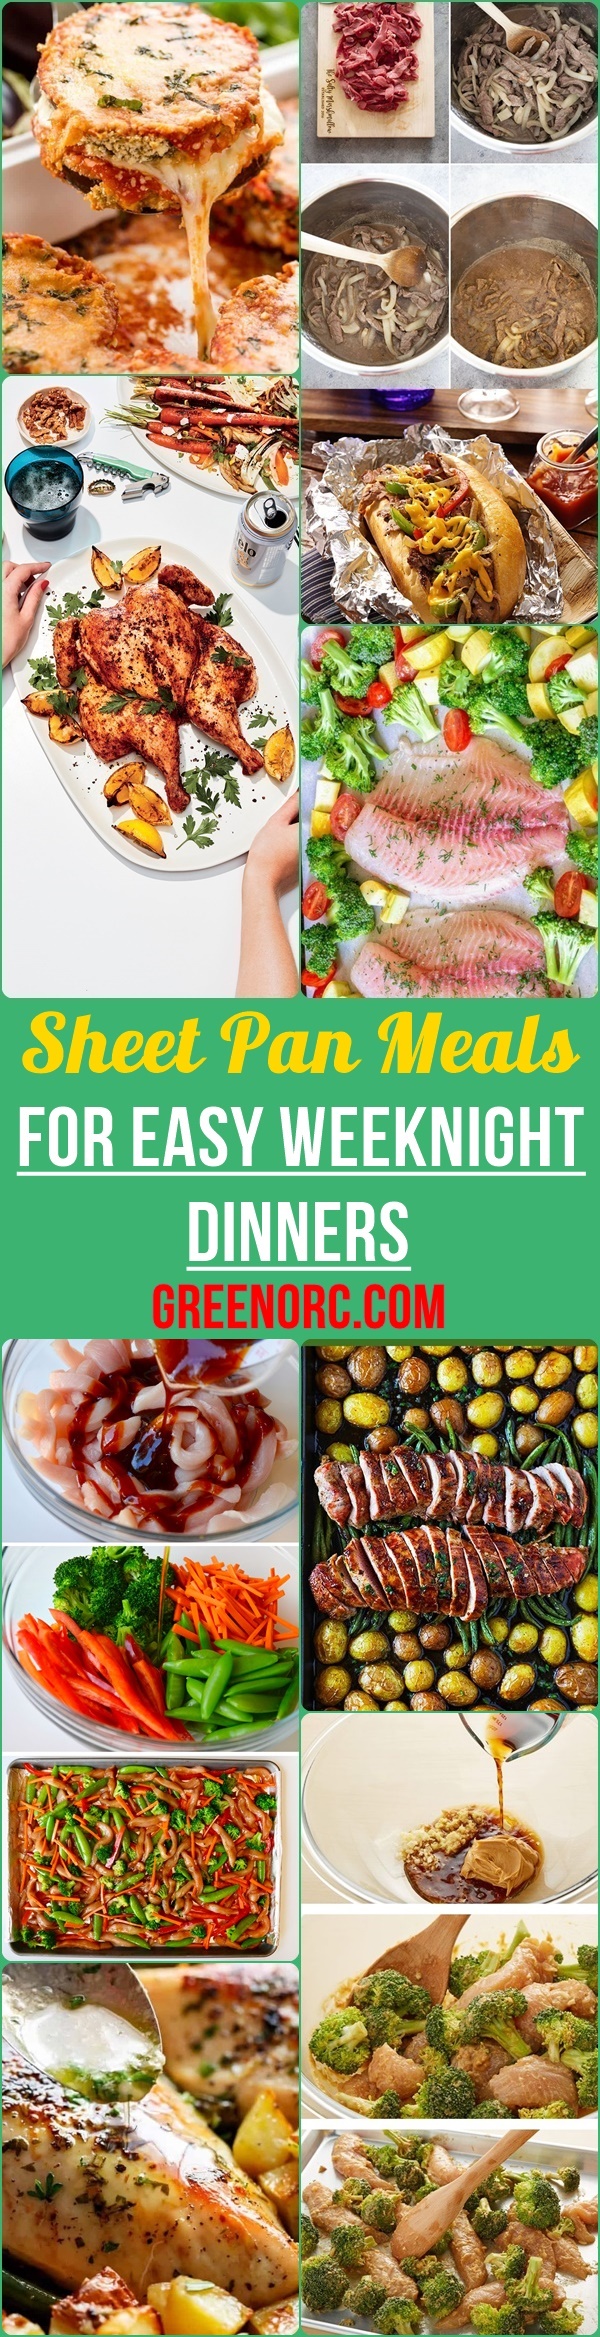 Sheet Pan Meals For Easy Weeknight Dinners